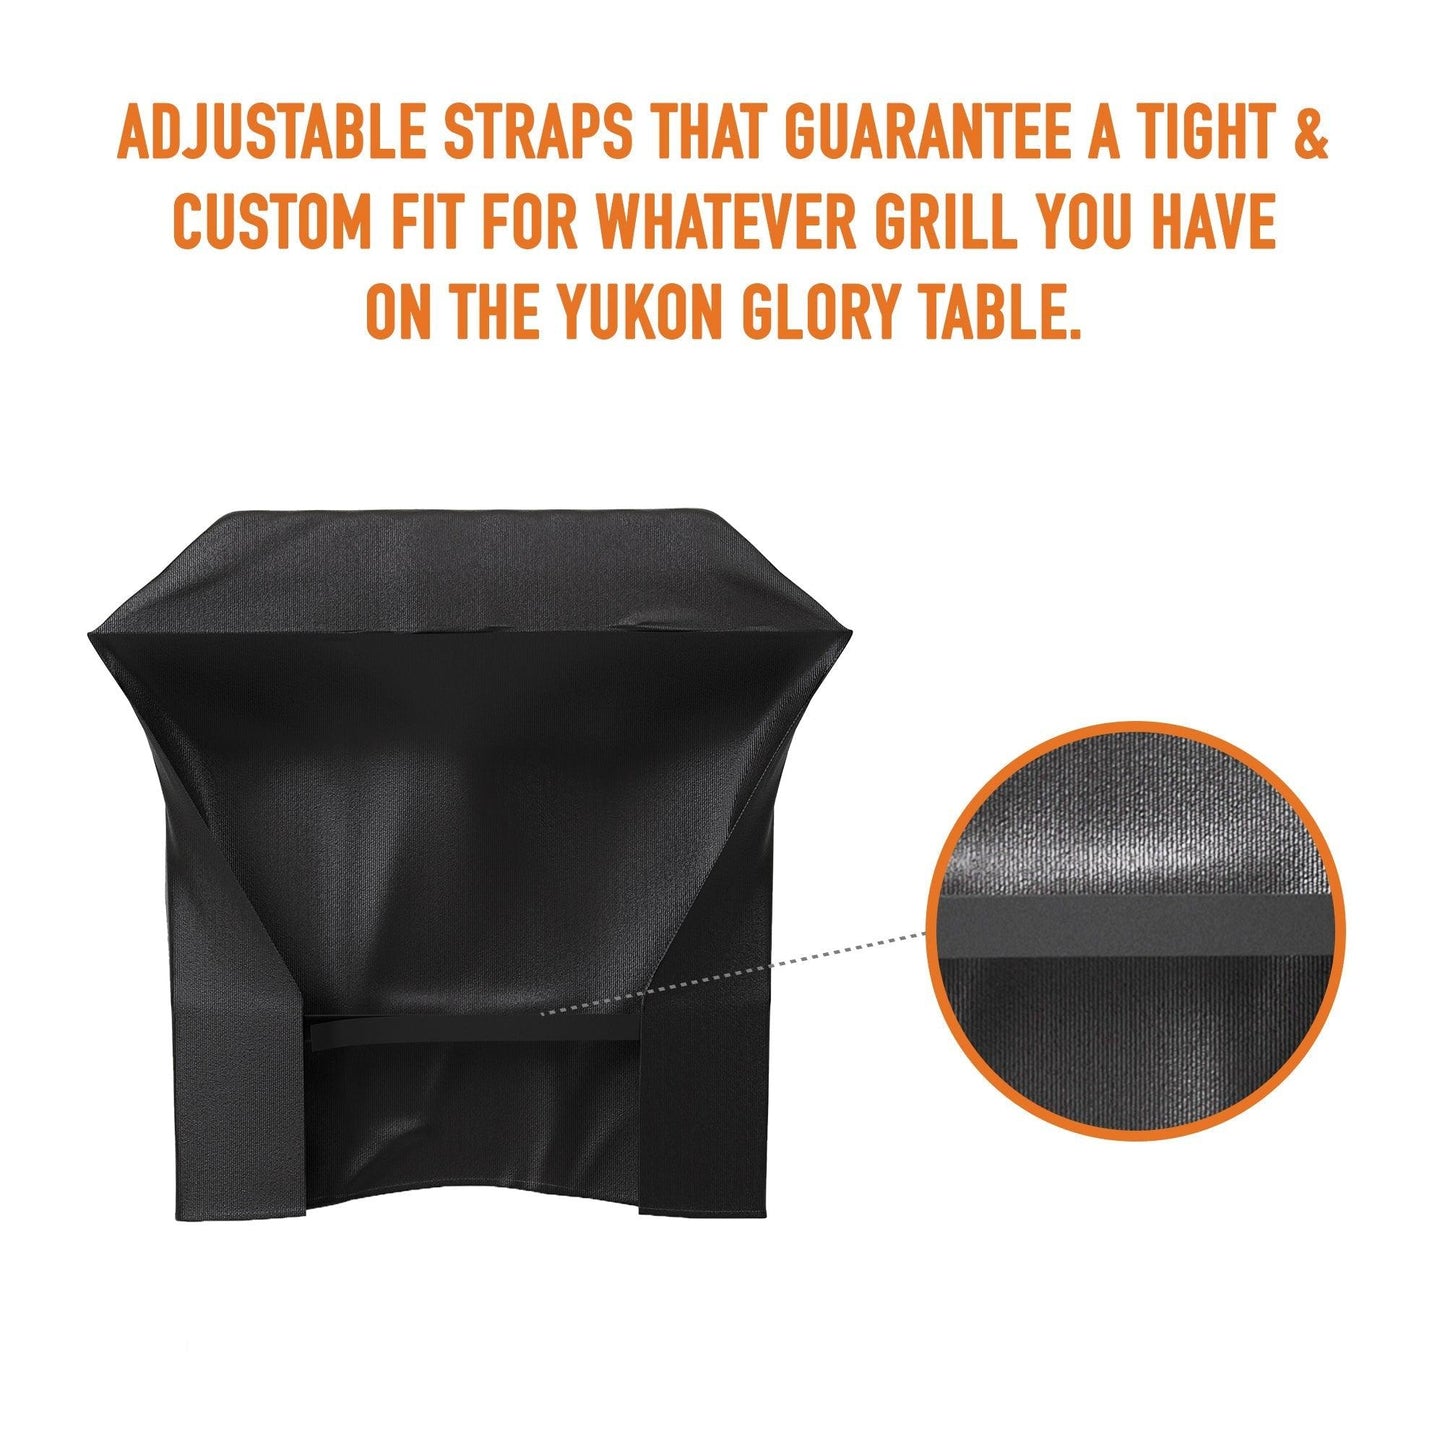 Yukon Glory Universal Portable Grill Table Cover– Cover for Yukon Glory Universal Portable Grill Griddles Stand – Weather Resistant